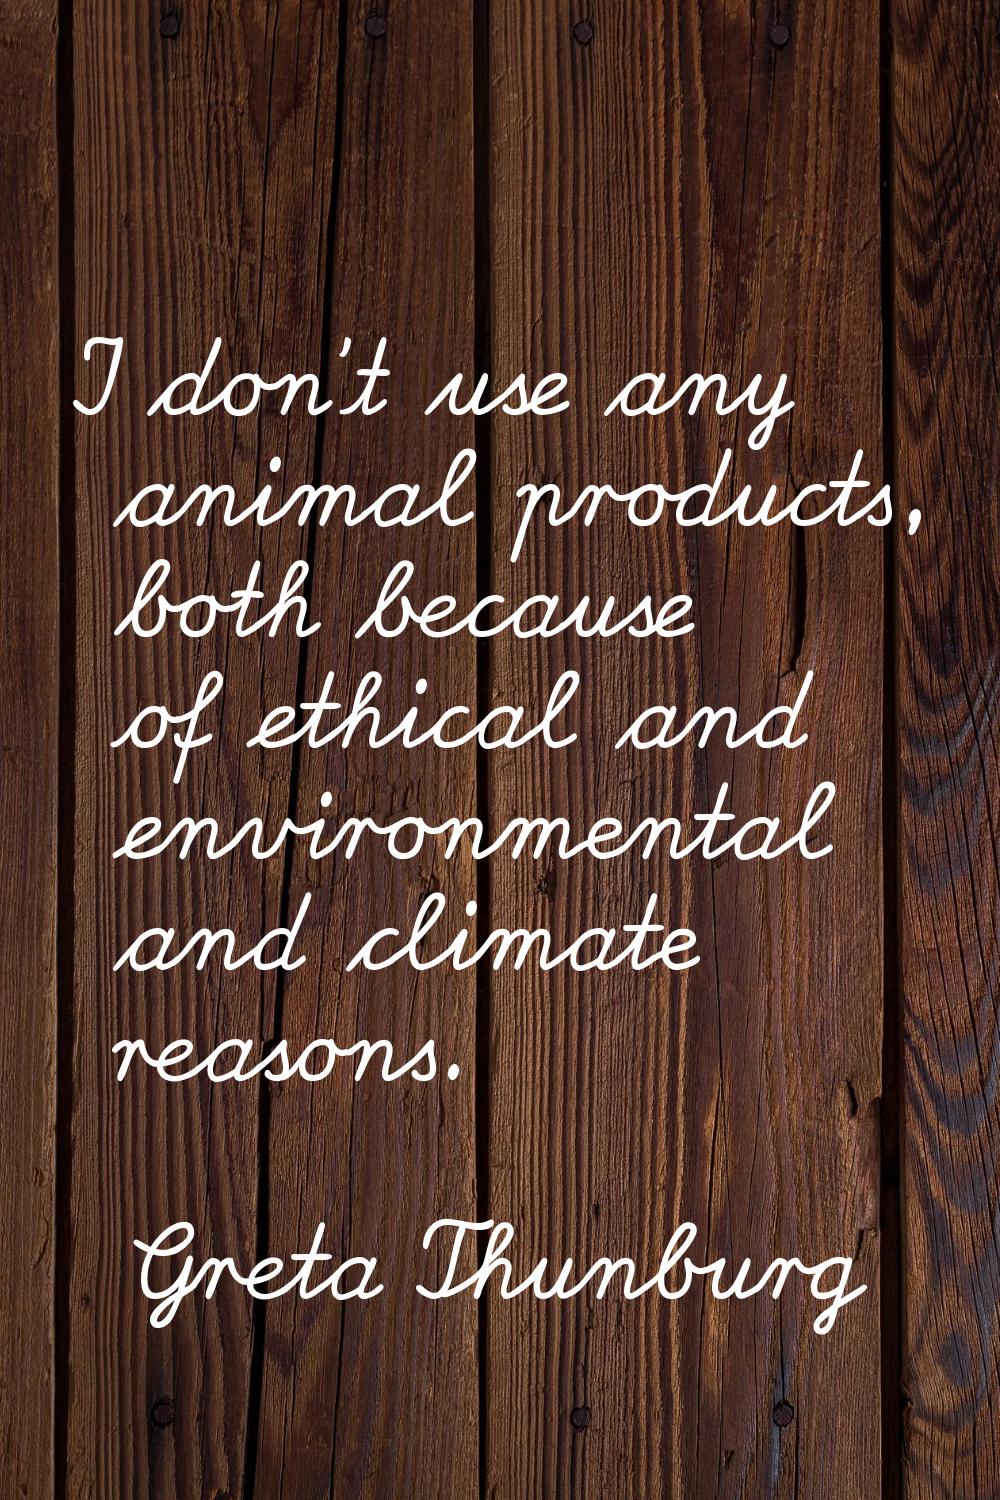 I don't use any animal products, both because of ethical and environmental and climate reasons.